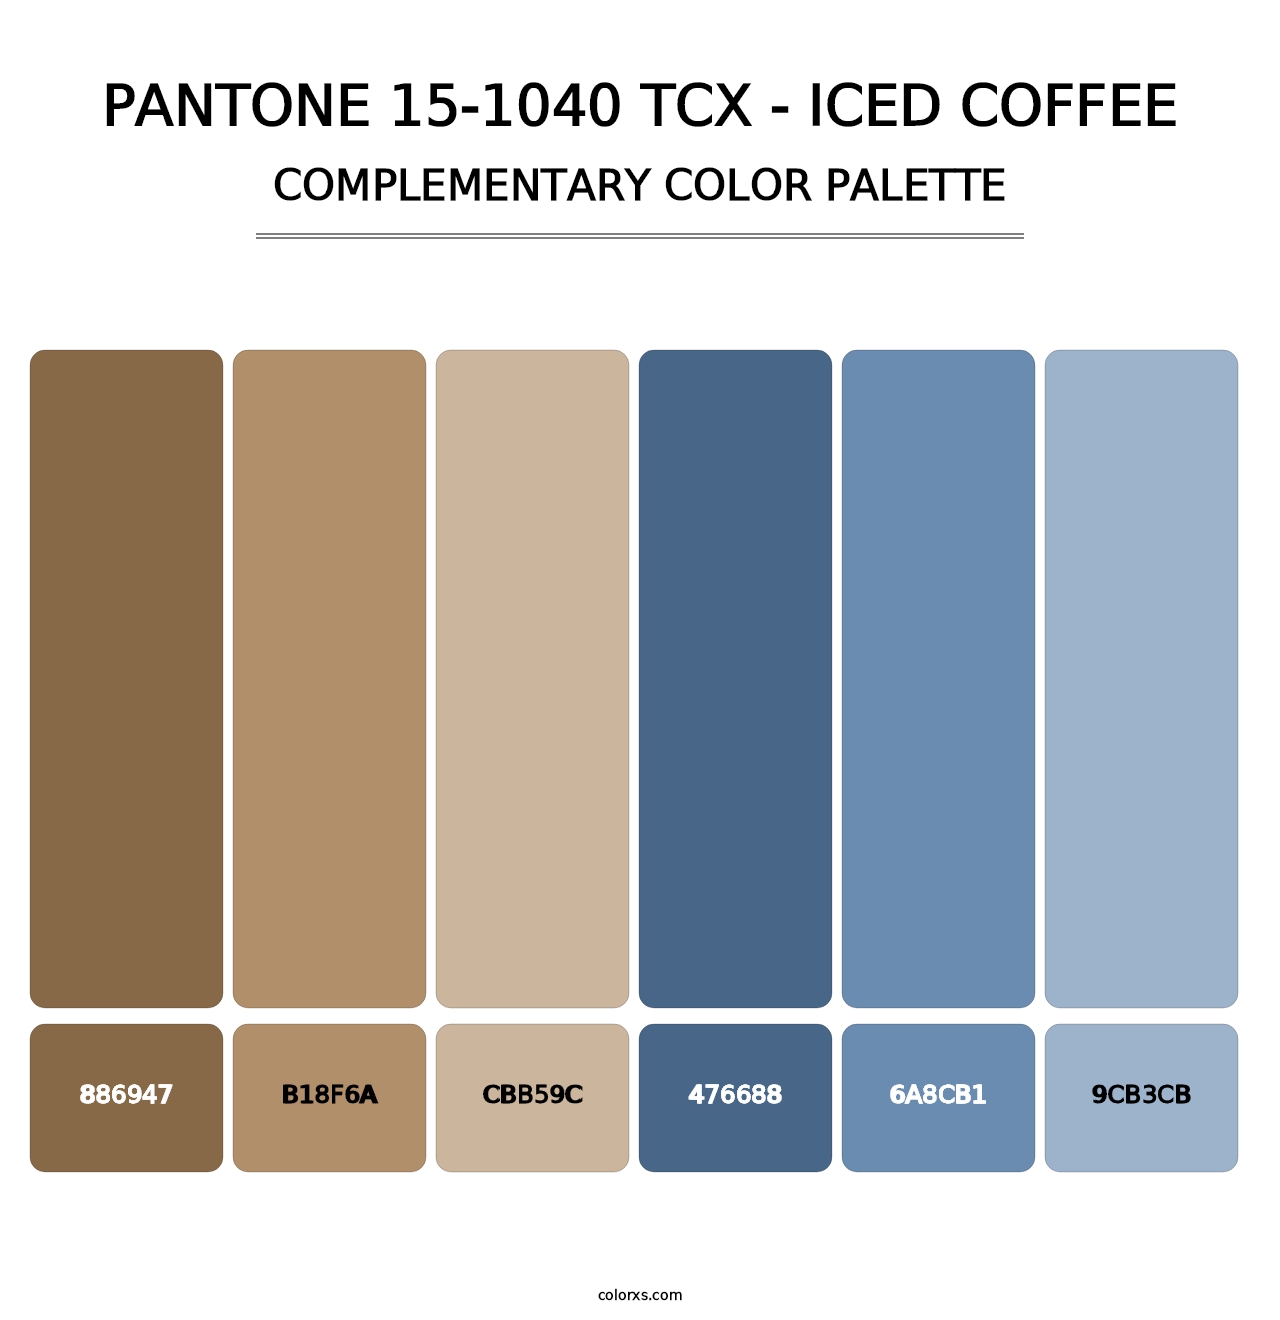 PANTONE 15-1040 TCX - Iced Coffee - Complementary Color Palette